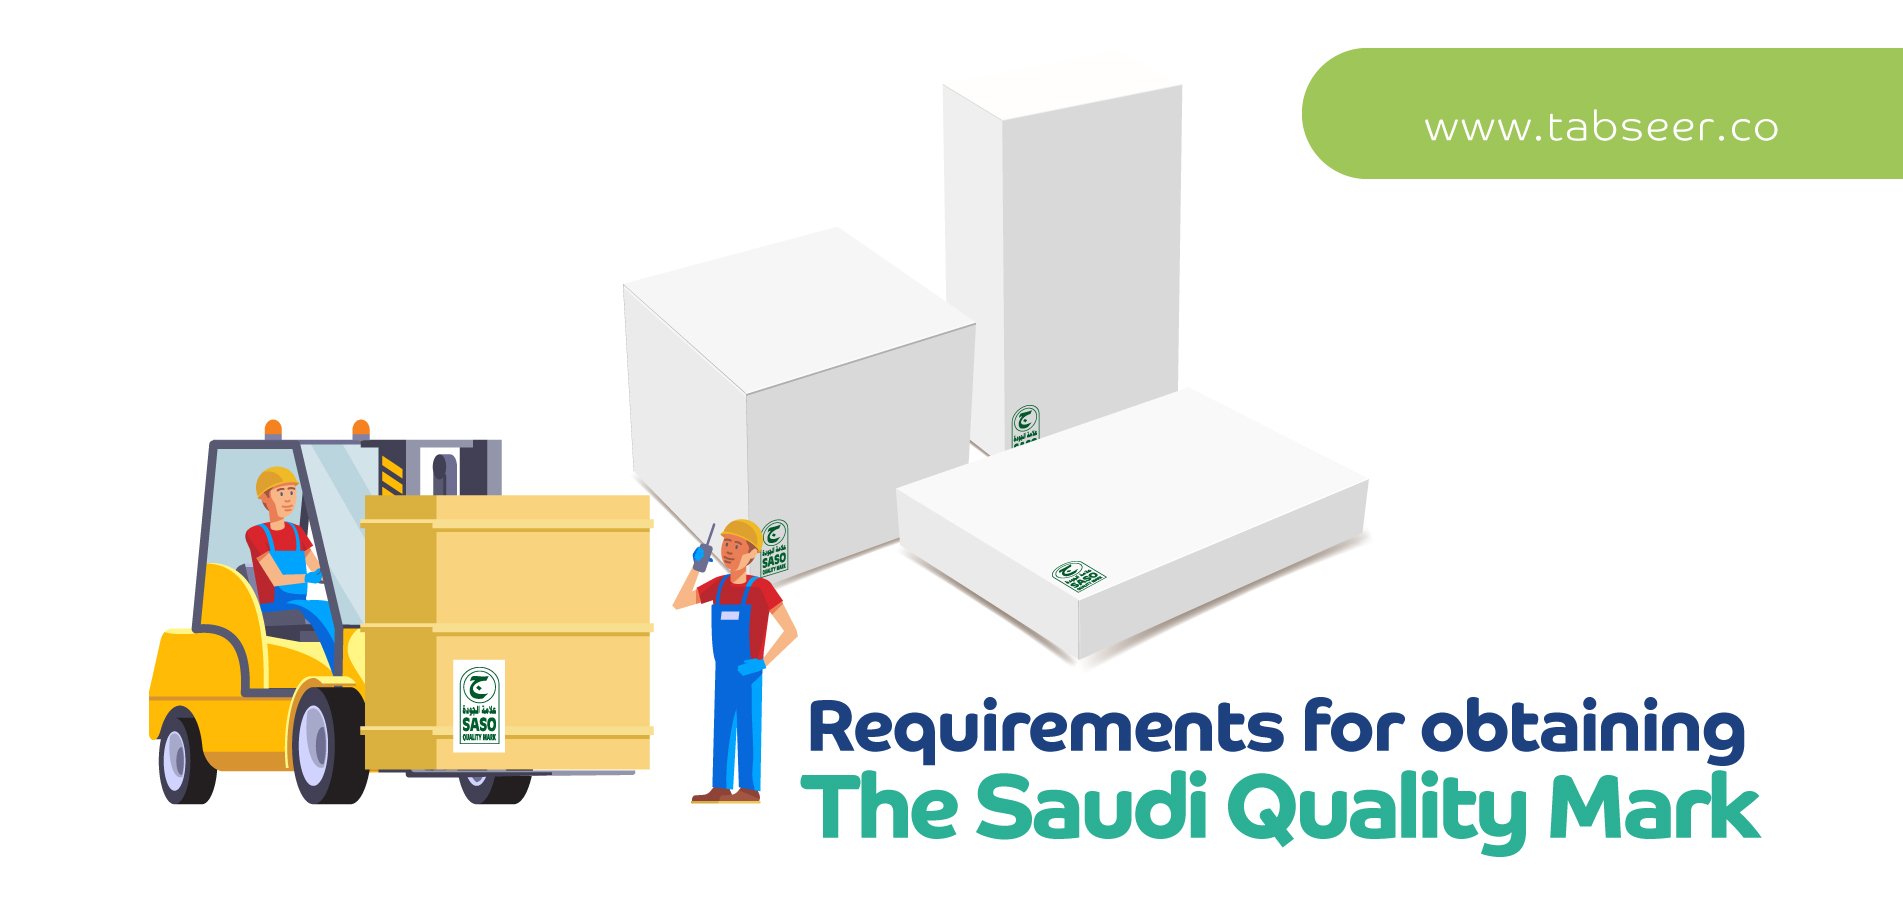 Obtaining the Saudi Quality Mark: a step-by-step guide